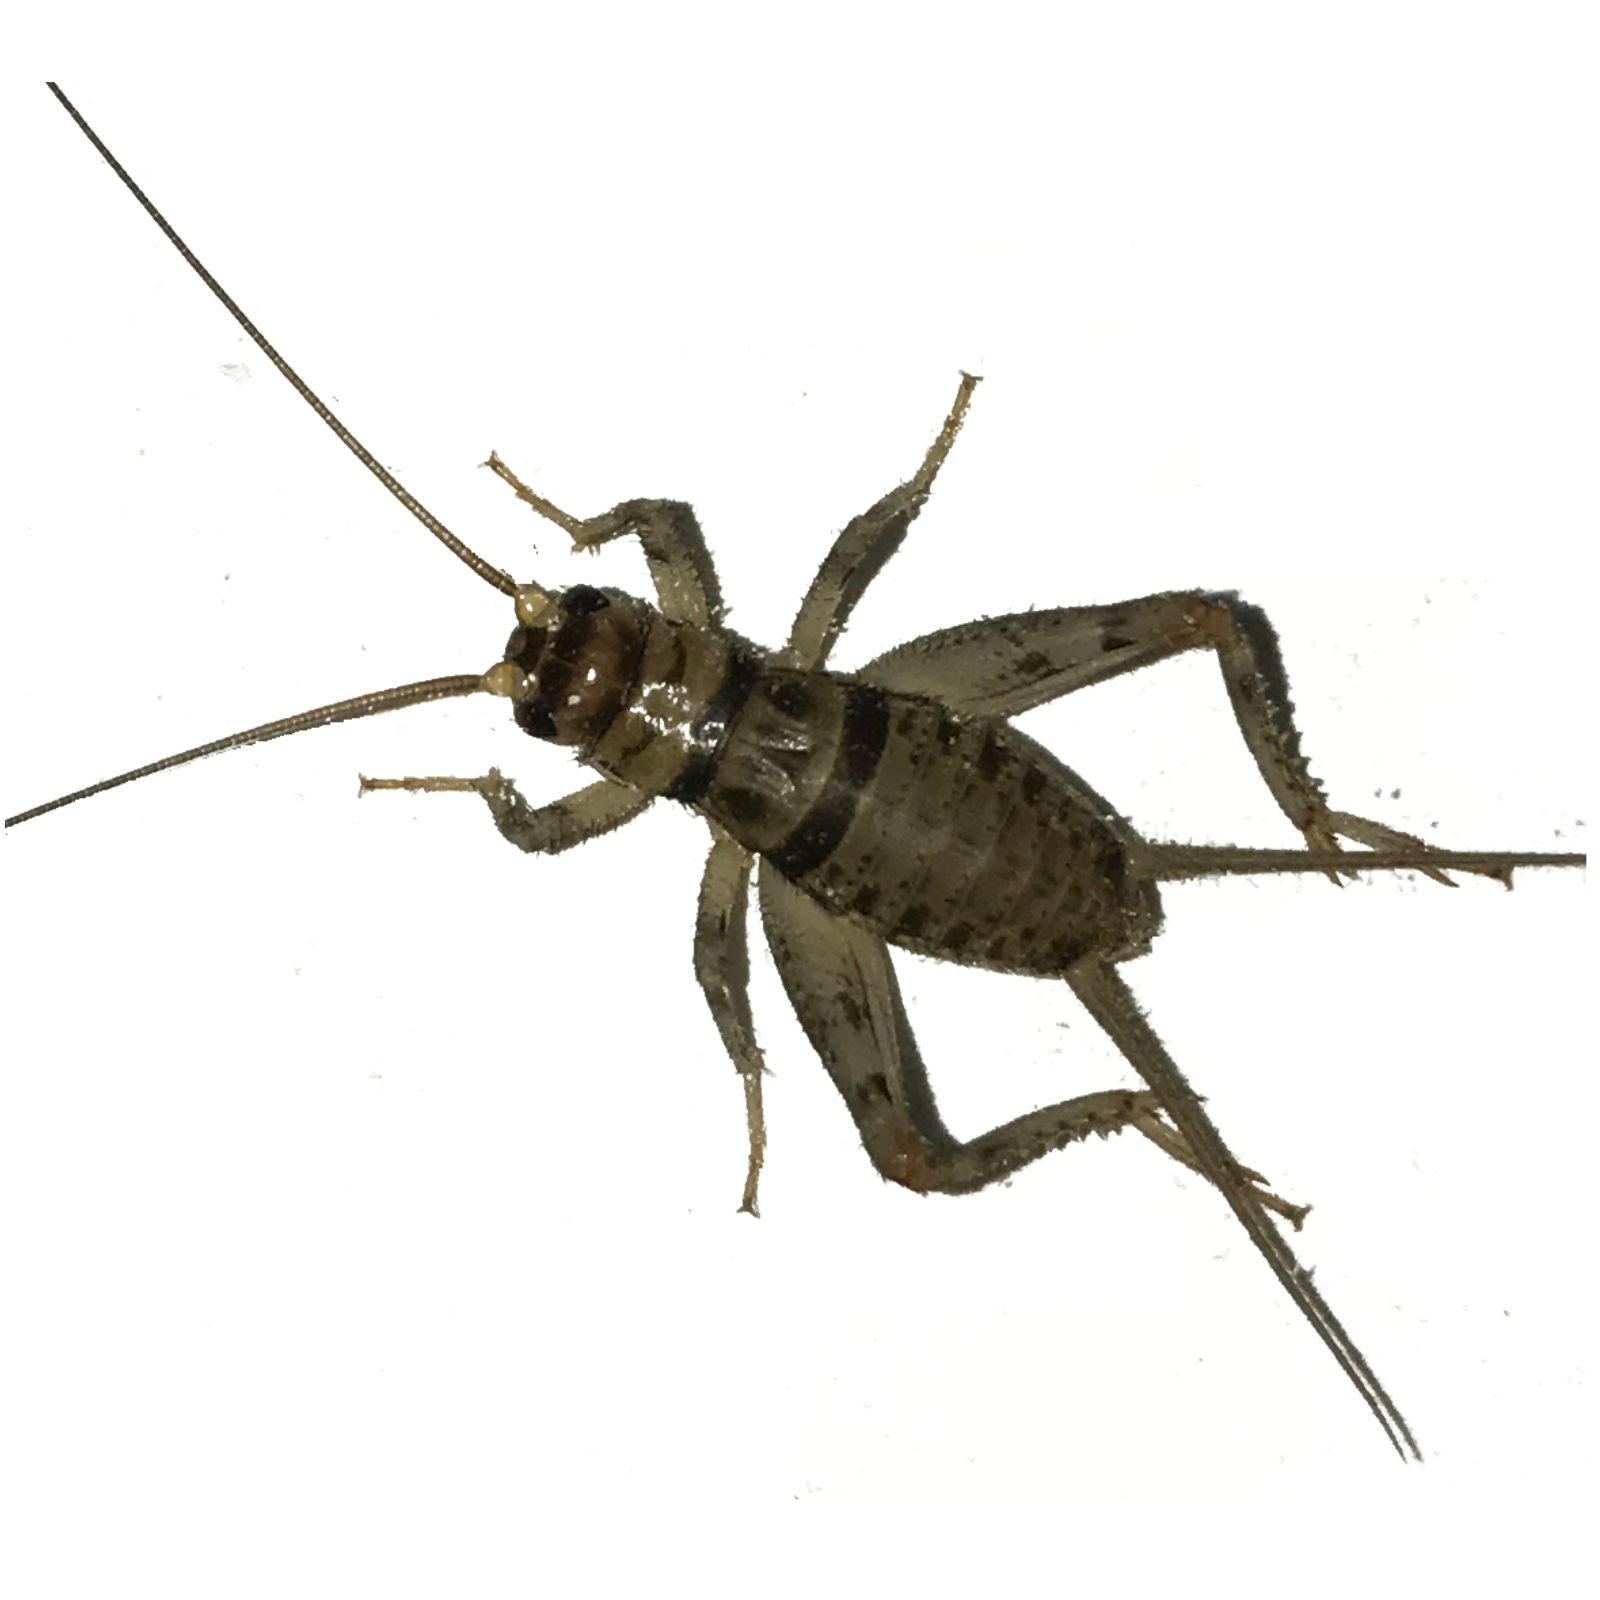 100, 250, 500, 1000+ Live Crickets (Banded) - Guaranteed Live Delivery Over 25 F